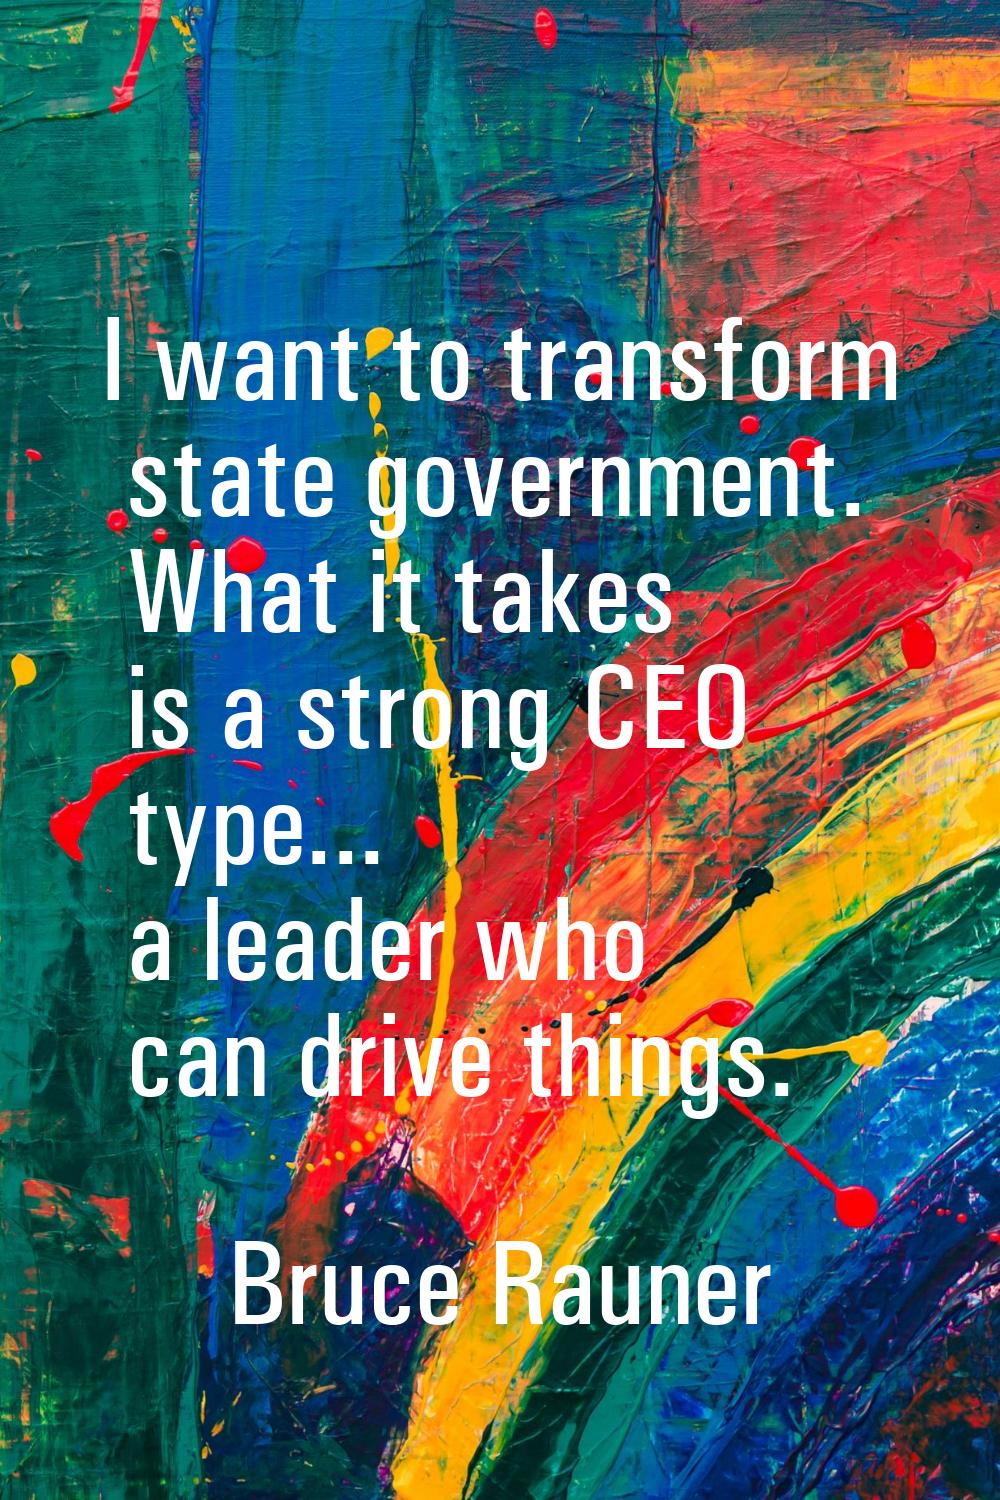 I want to transform state government. What it takes is a strong CEO type... a leader who can drive 